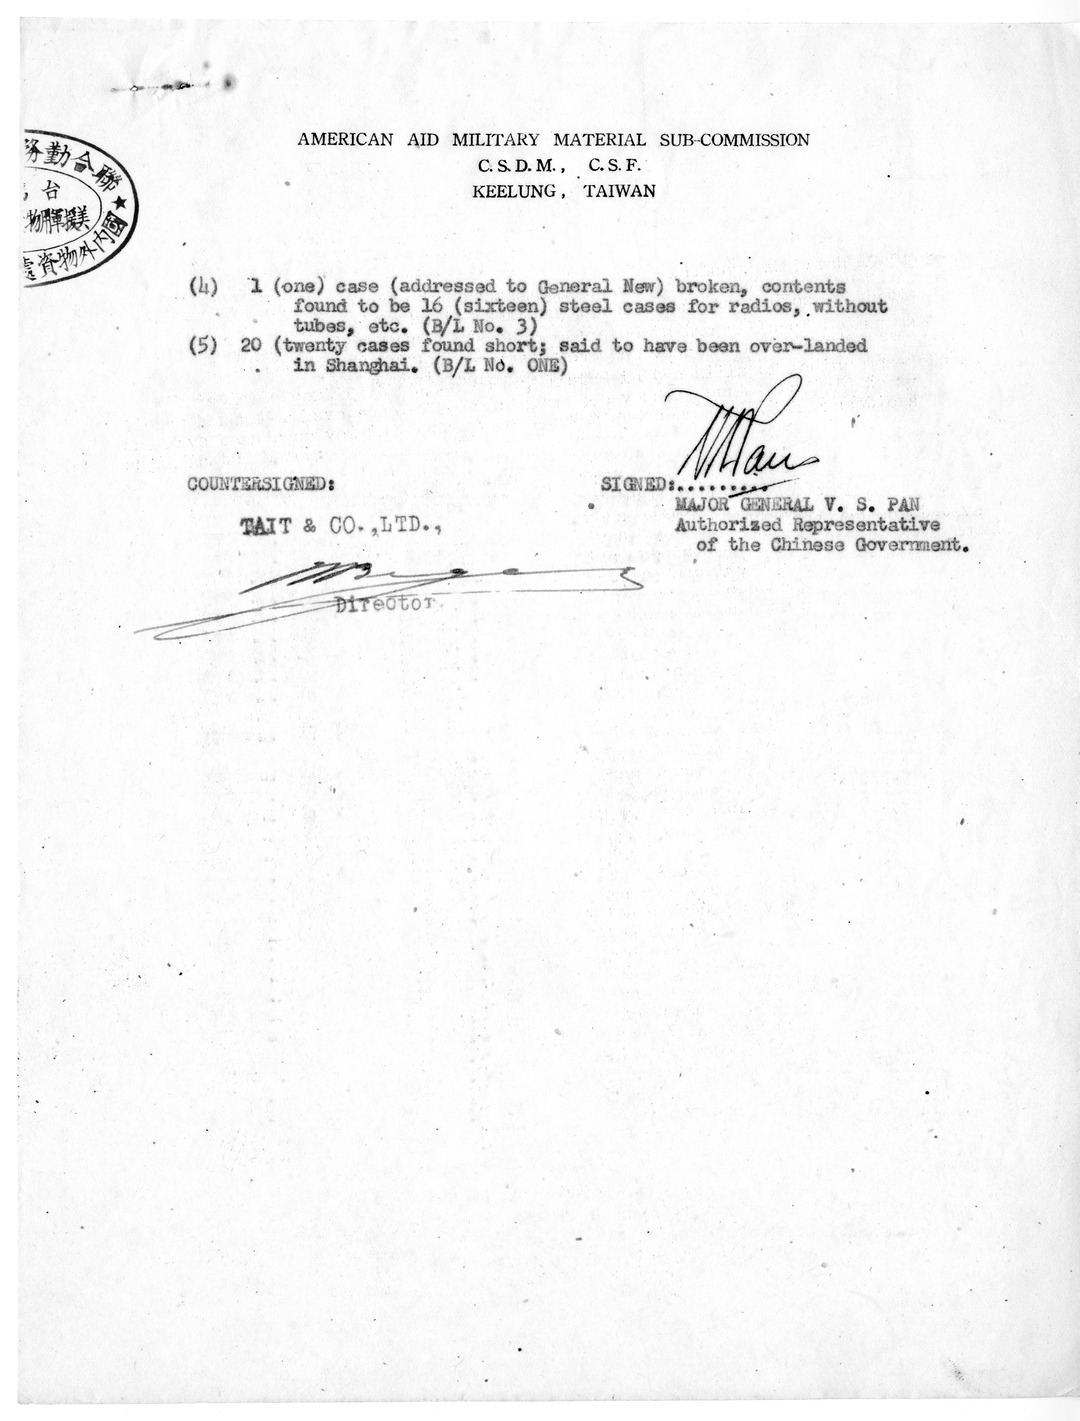 Certificate of Receipt of Materials from Major General V. S. Pan